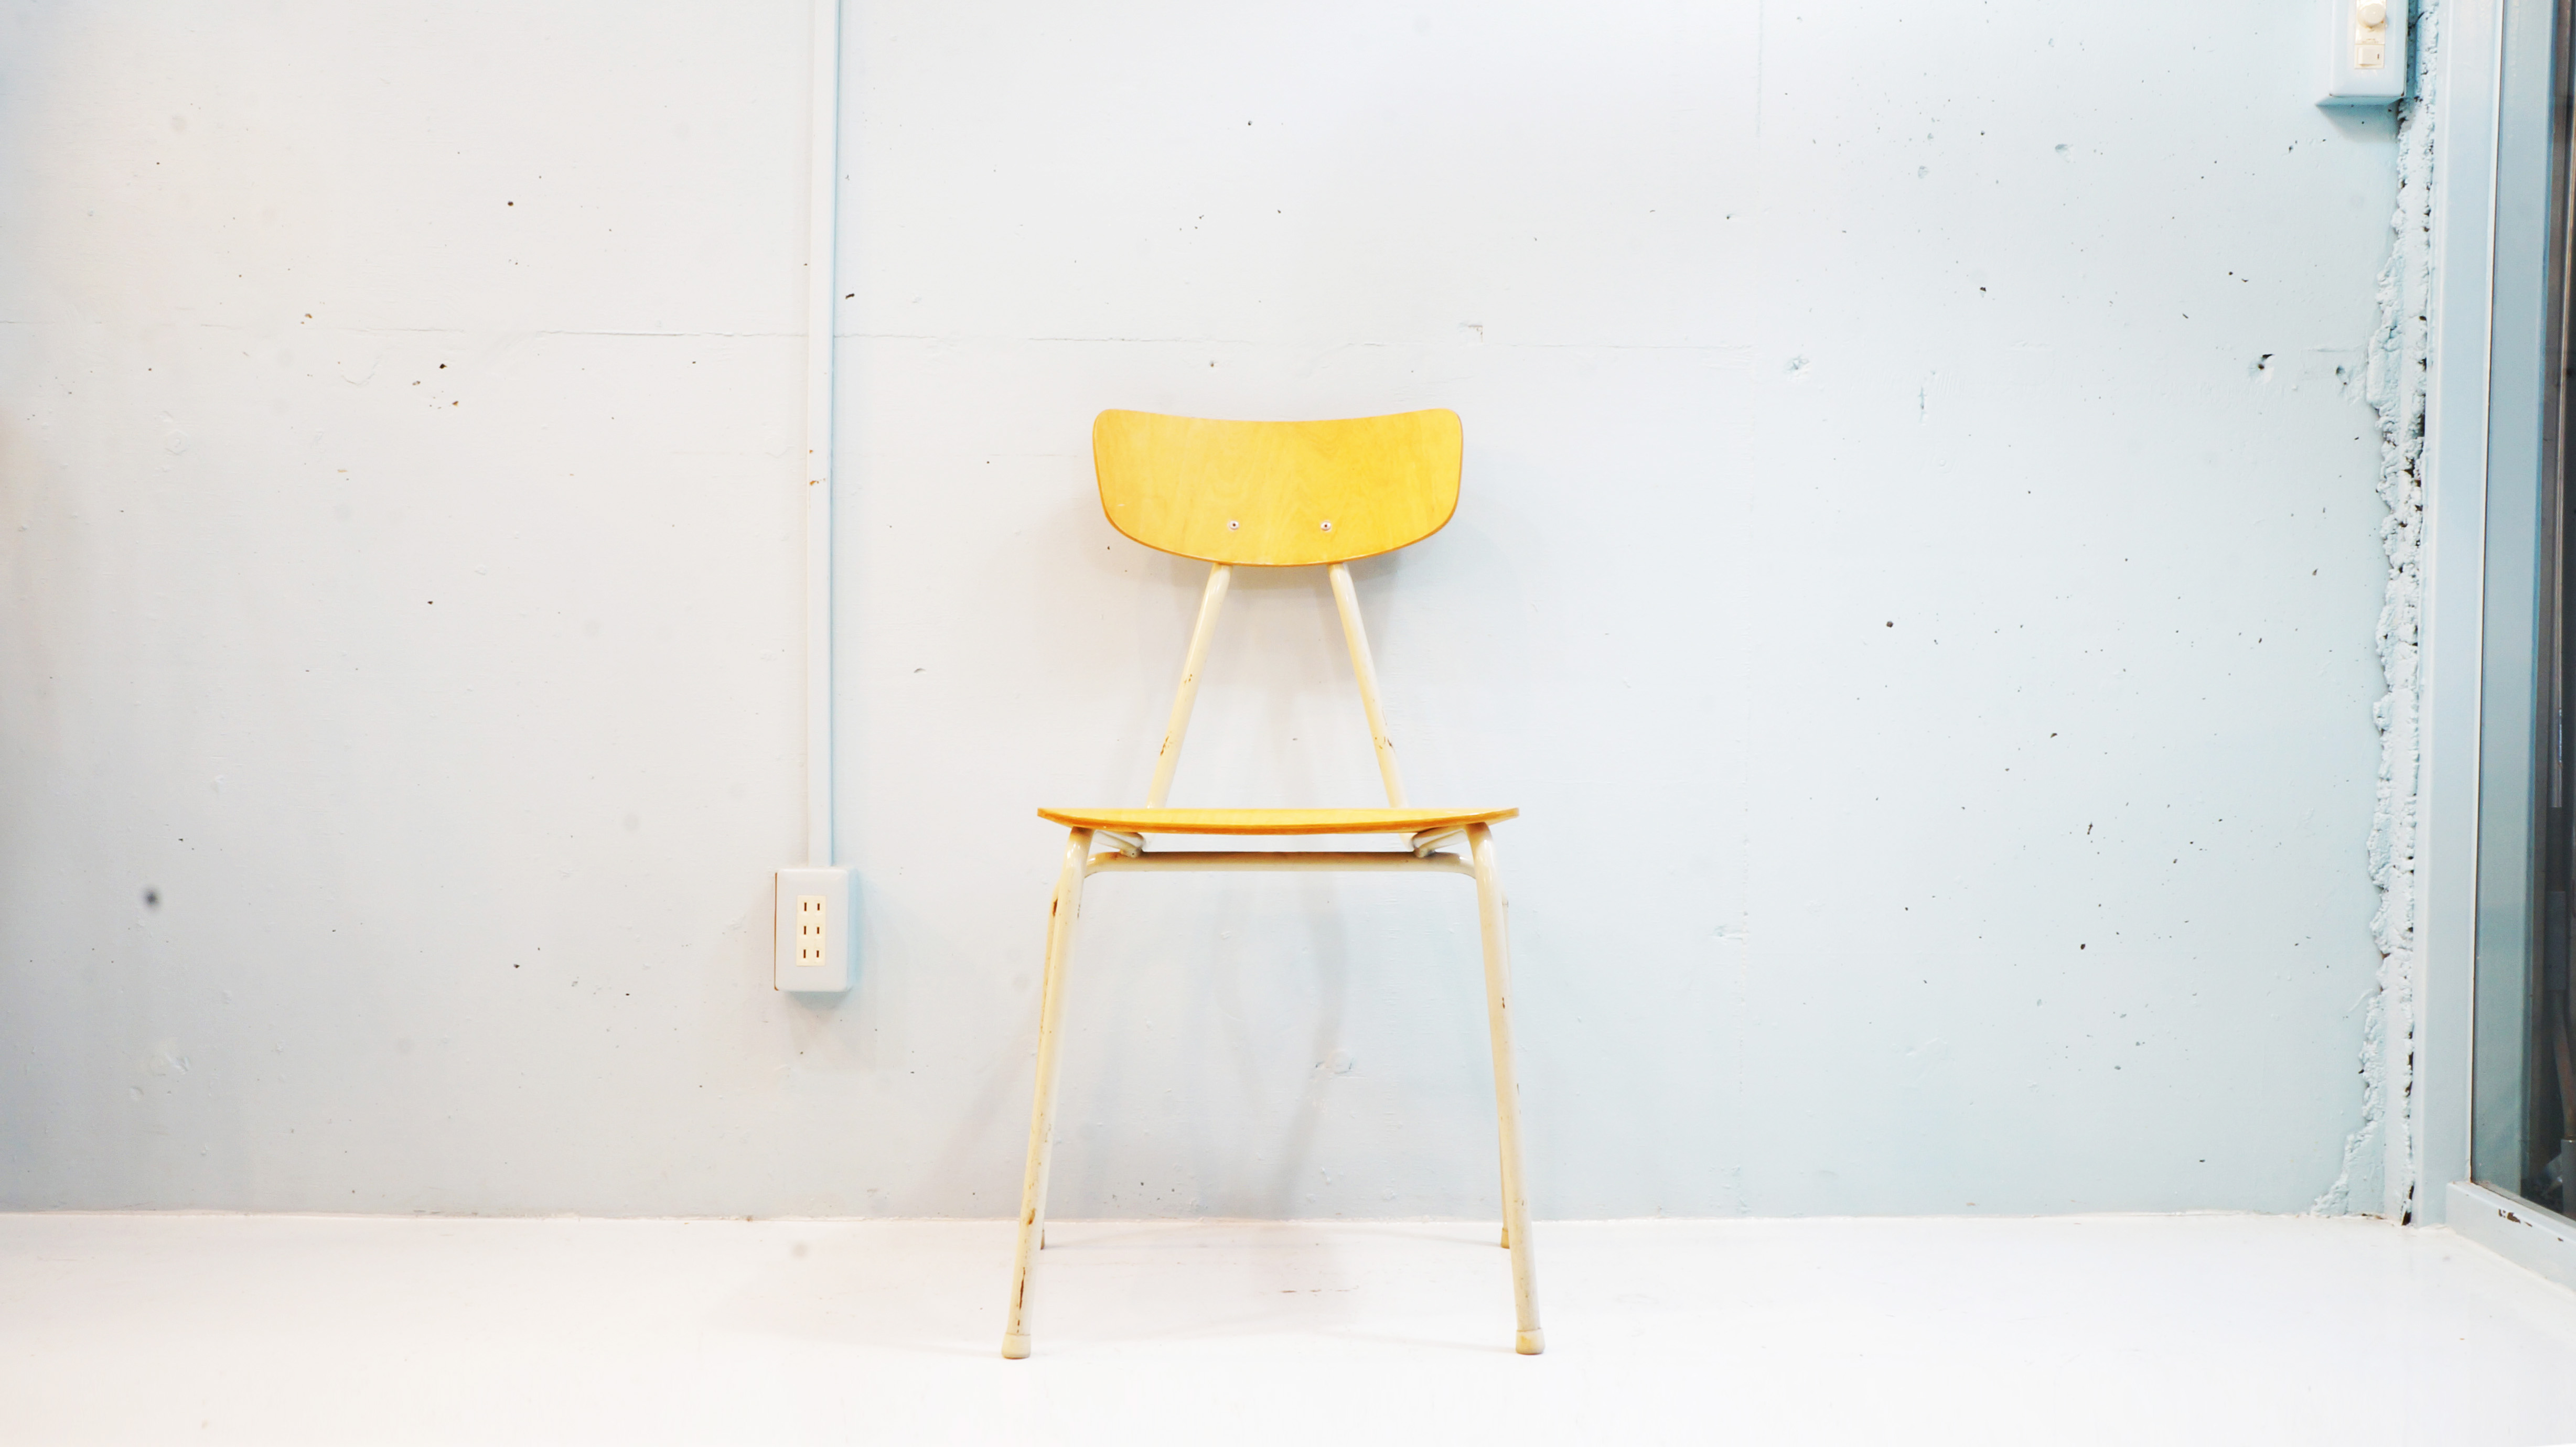 ARY STALMOBLER SCHOOL CHAIR made in SWEDEN / スェーデン製 スクールチェア 学校椅子